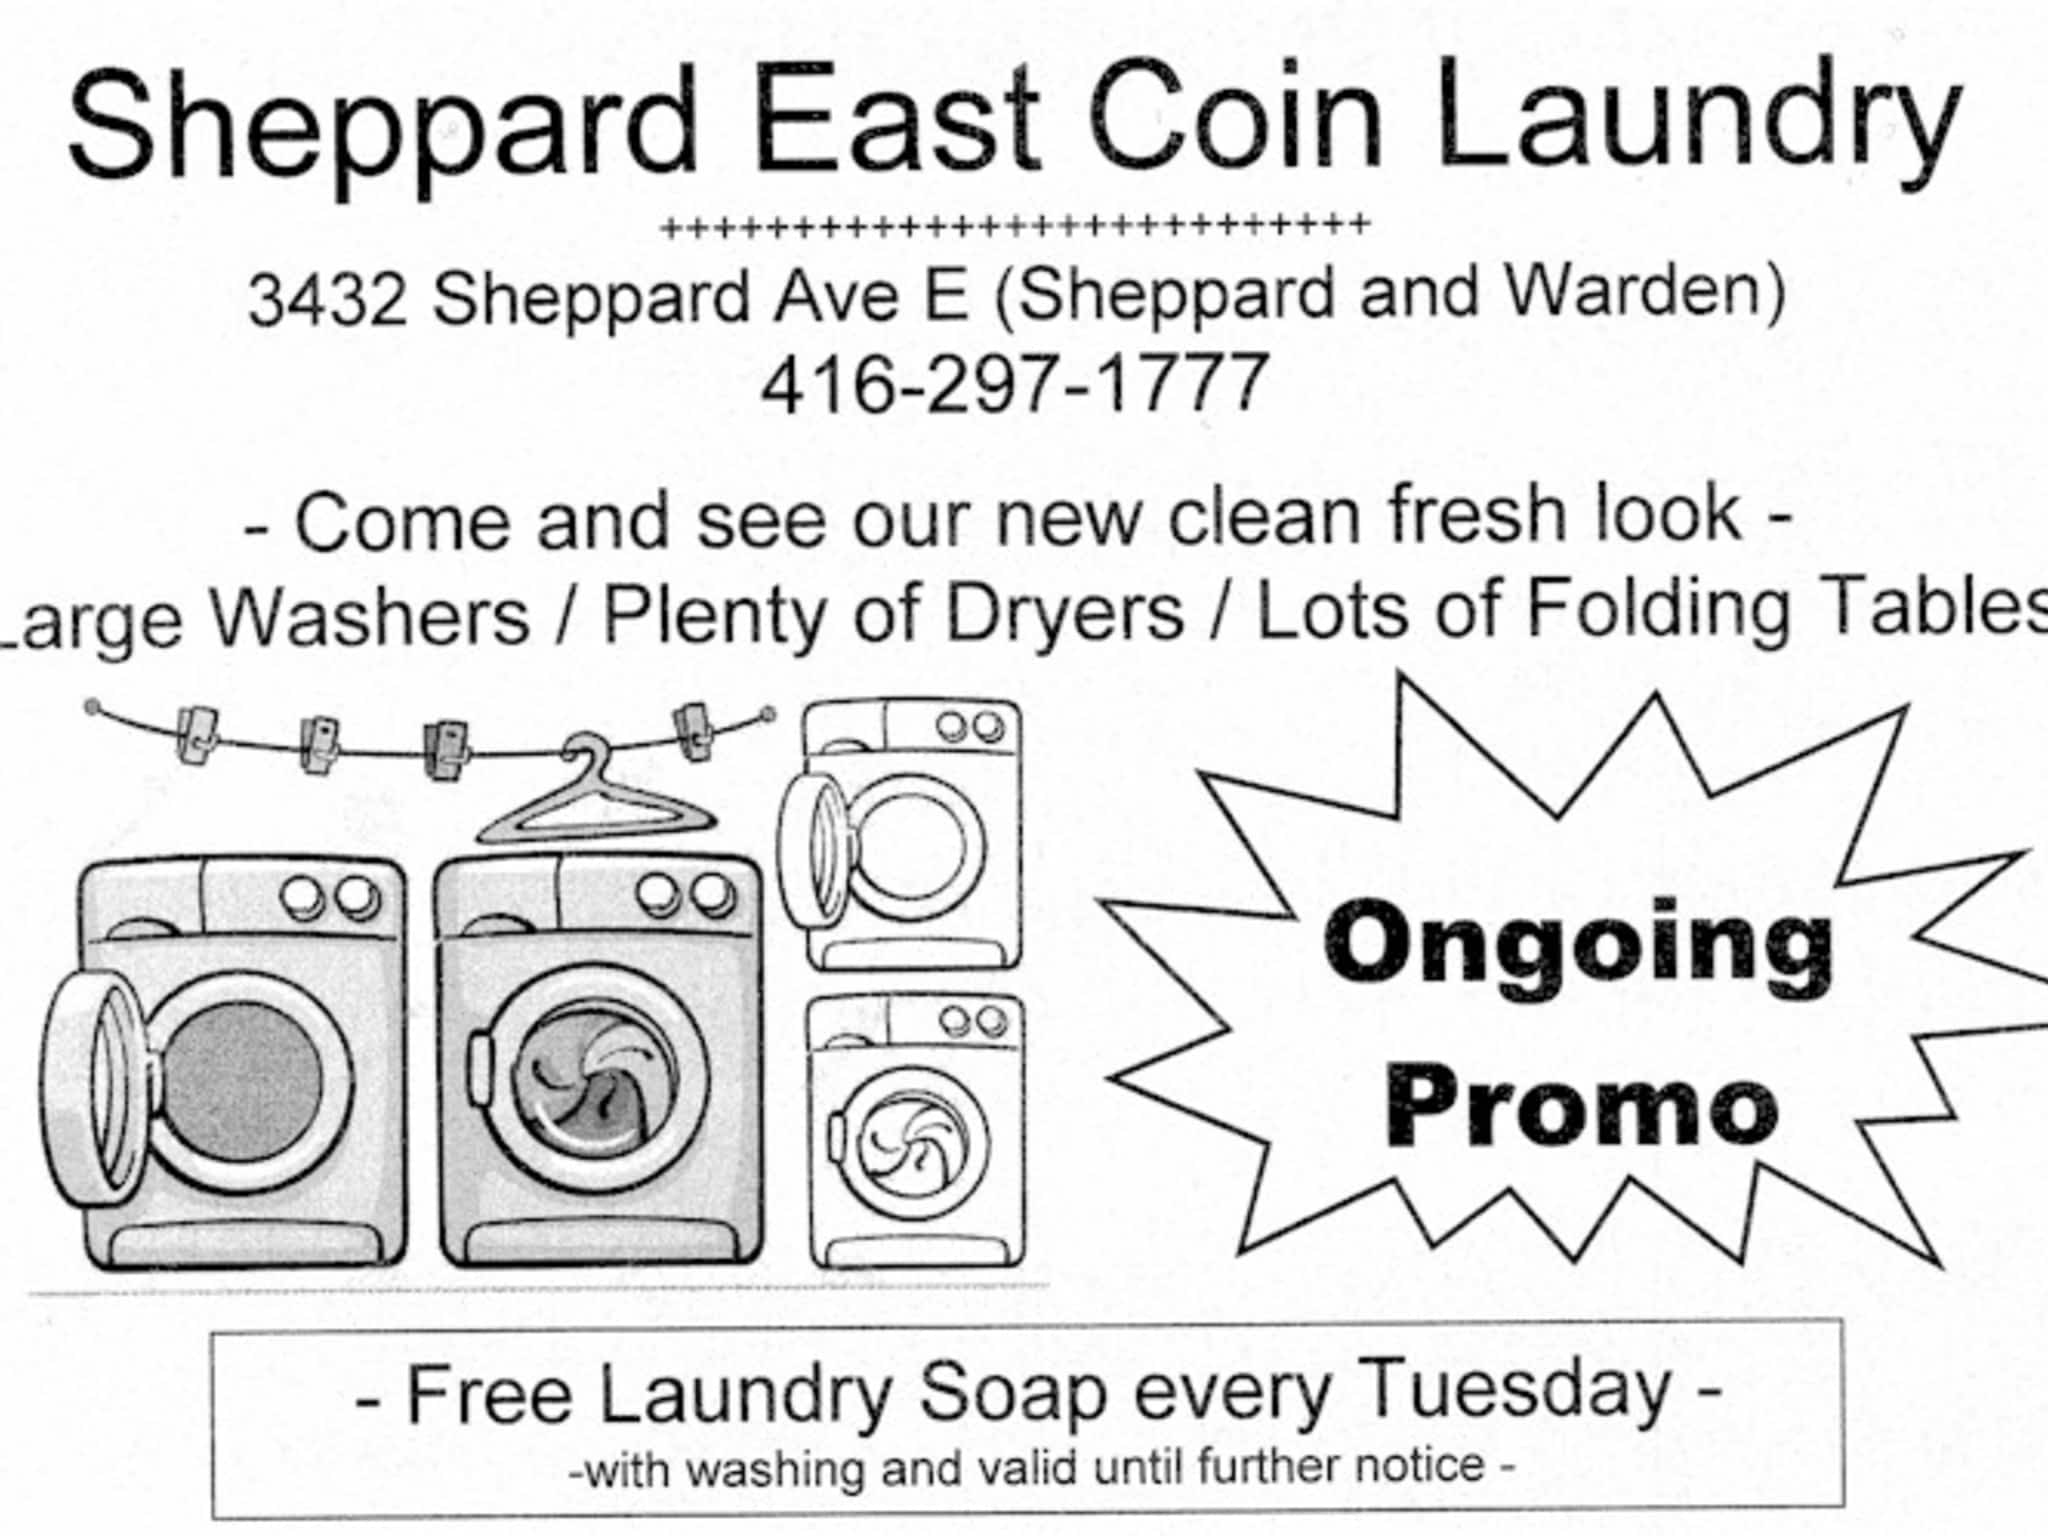 photo SHEPPARD EAST COIN LAUNDRY